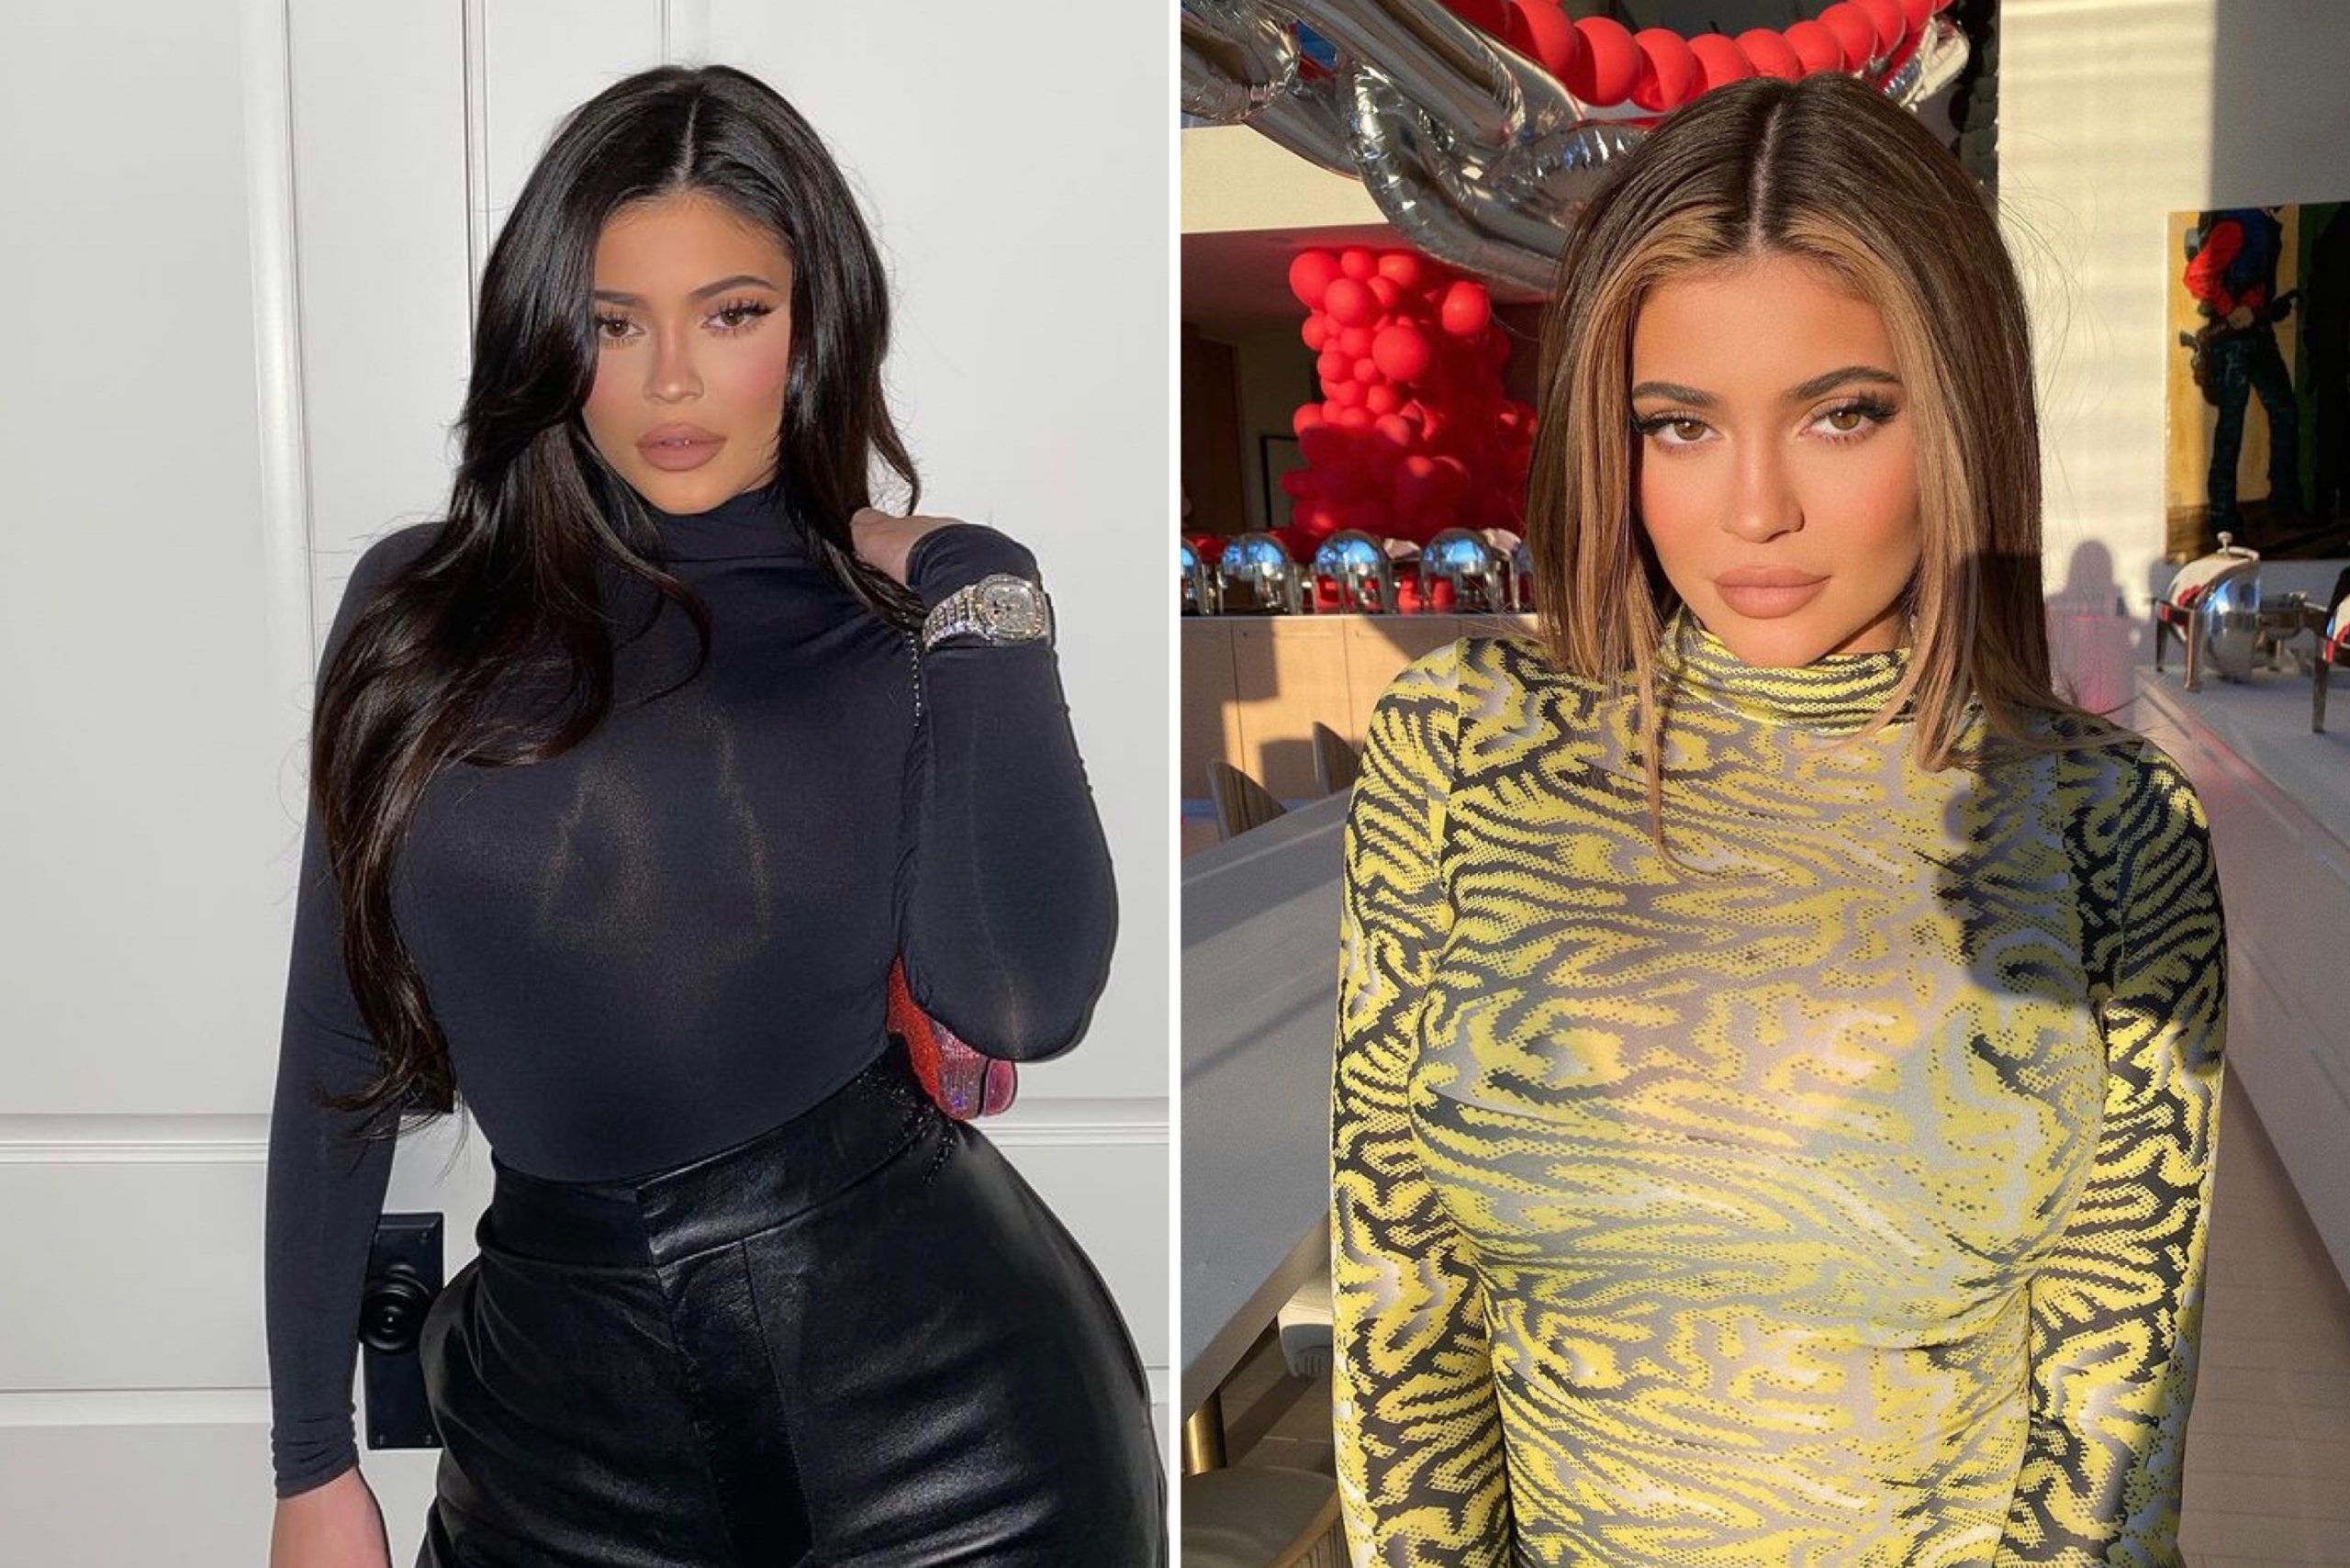 Kylie Jenner Tops Forbes’ 2020 List Of World’s Highest Paid Celebrities Despite Being Stripped Of Billionaire Status